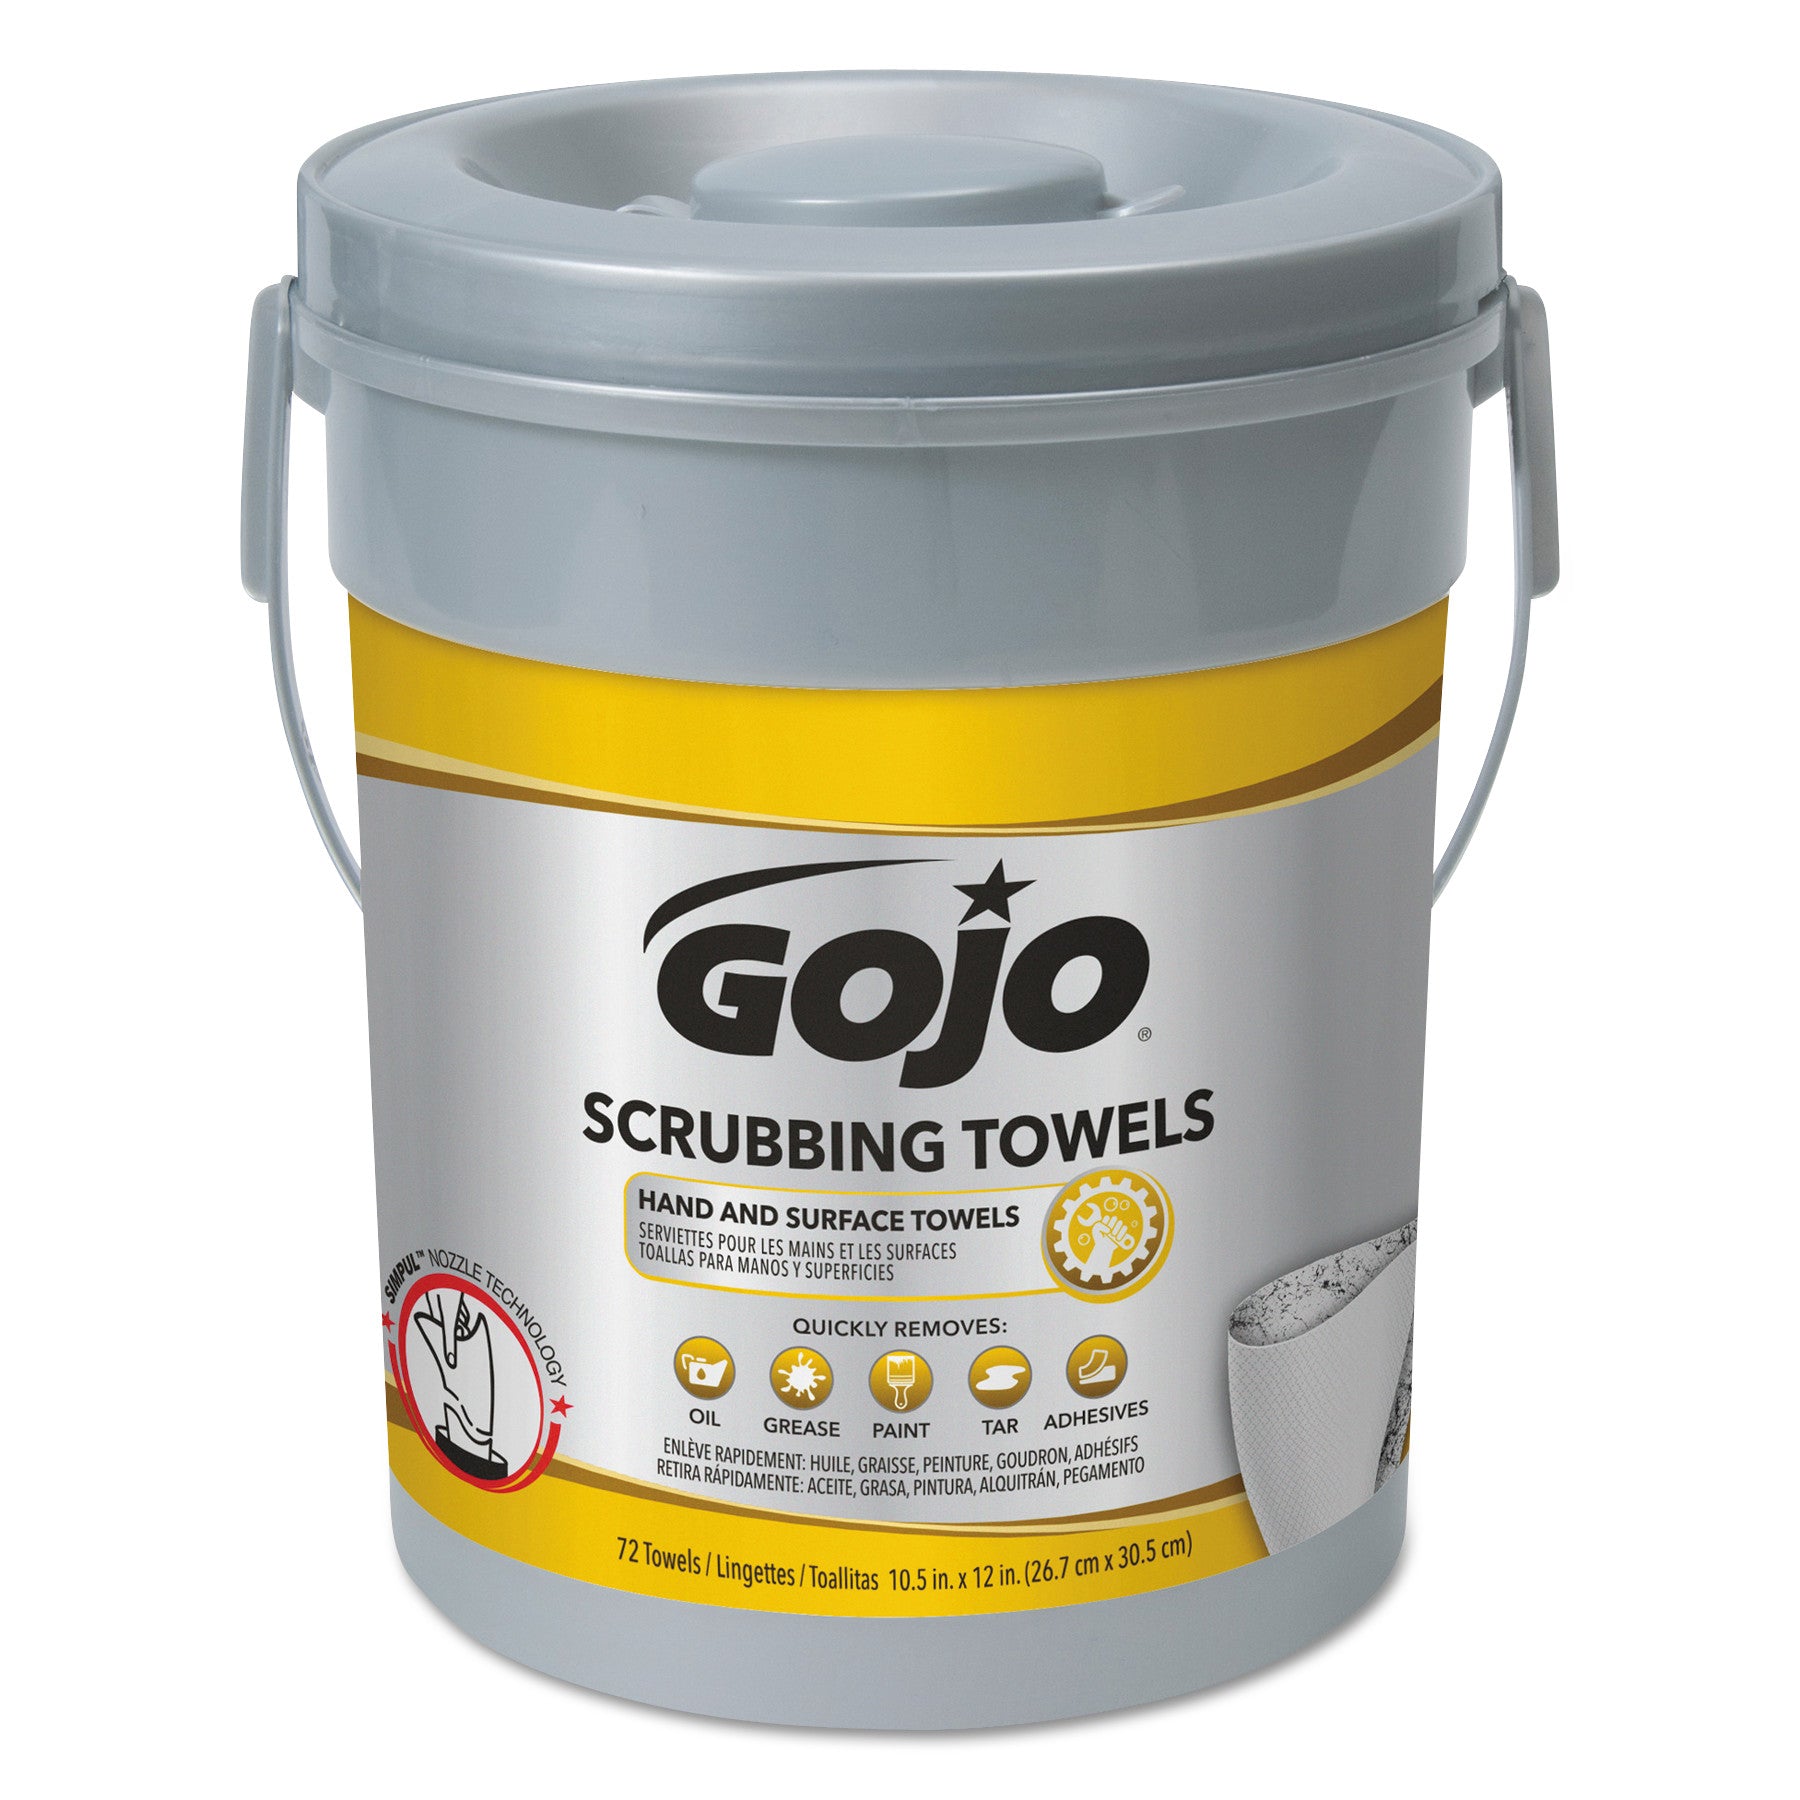 Scrubbing Towels, Hand Cleaning, 2-Ply, 10.5 x 12, Silver/Yellow, 72/Bucket, 6/Carton - 